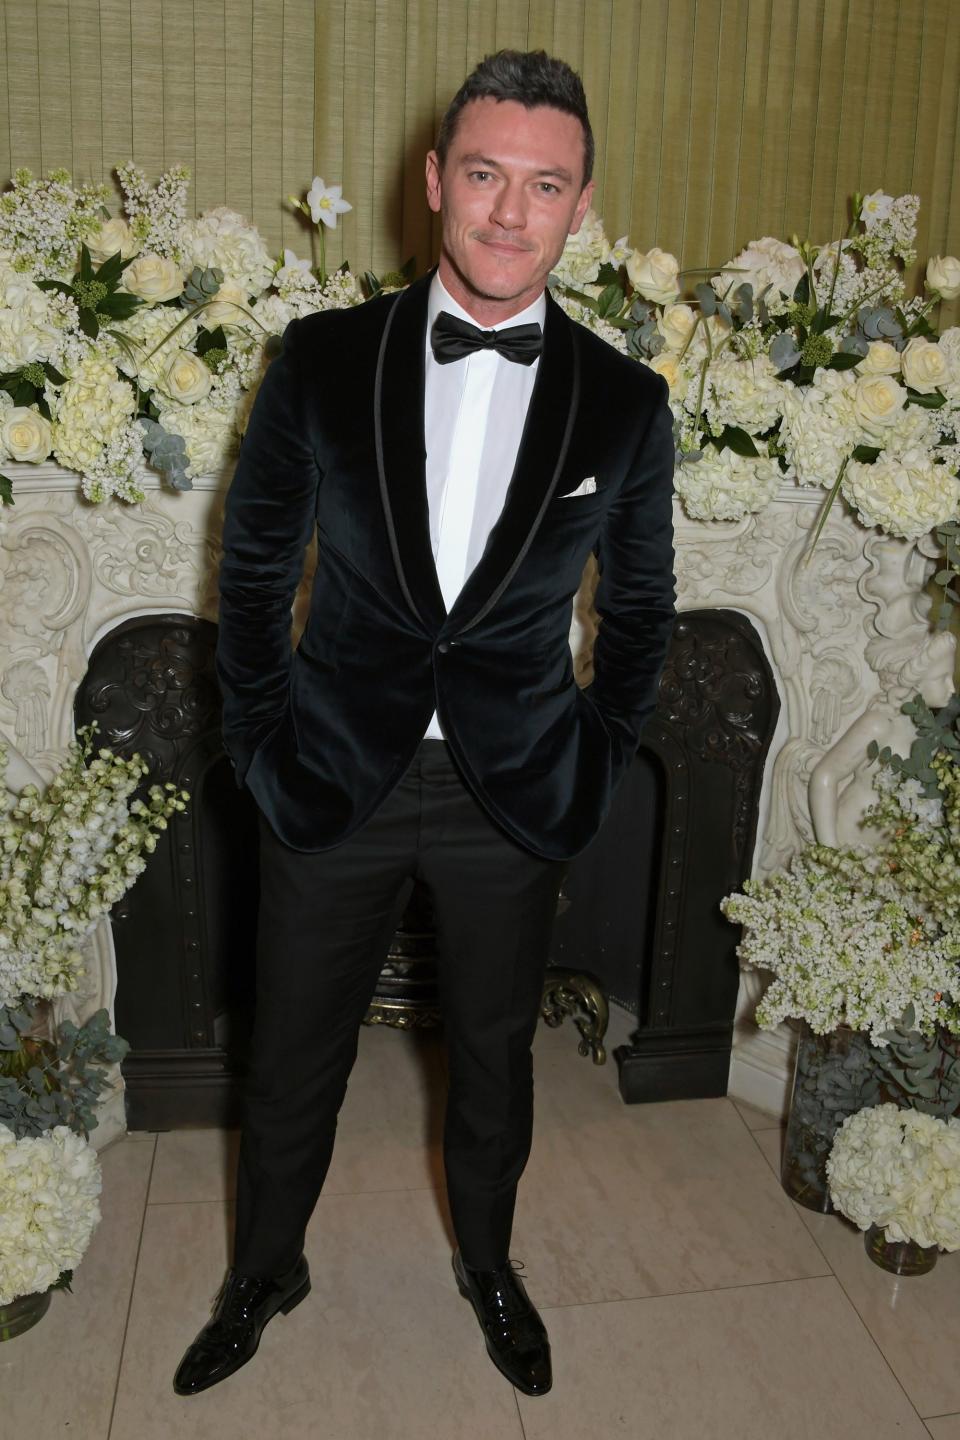 Luke Evans attends the British Vogue and Tiffany & Co. Celebrate Fashion and Film Party at Annabel’s